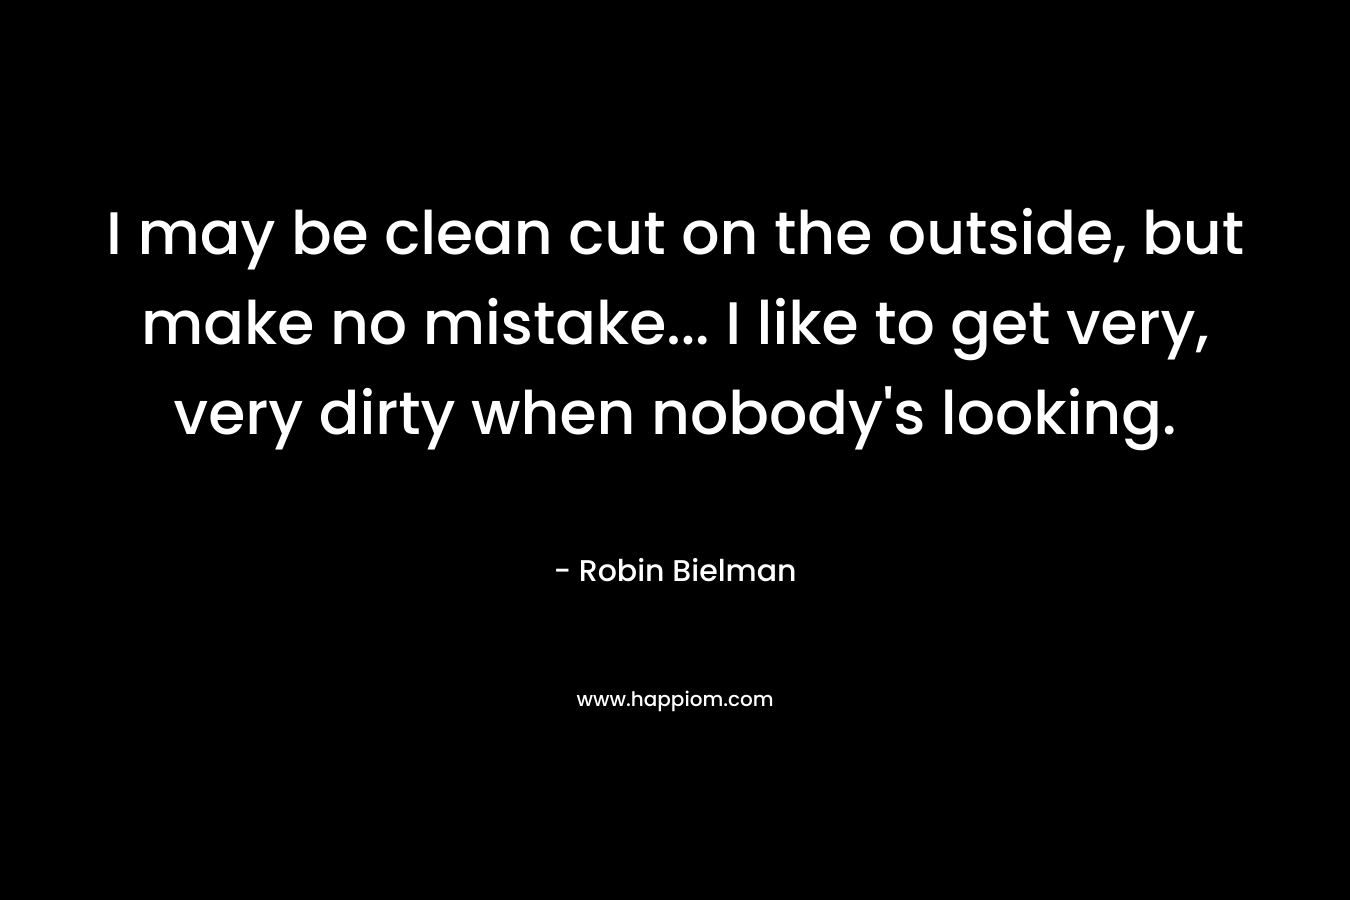 I may be clean cut on the outside, but make no mistake... I like to get very, very dirty when nobody's looking.